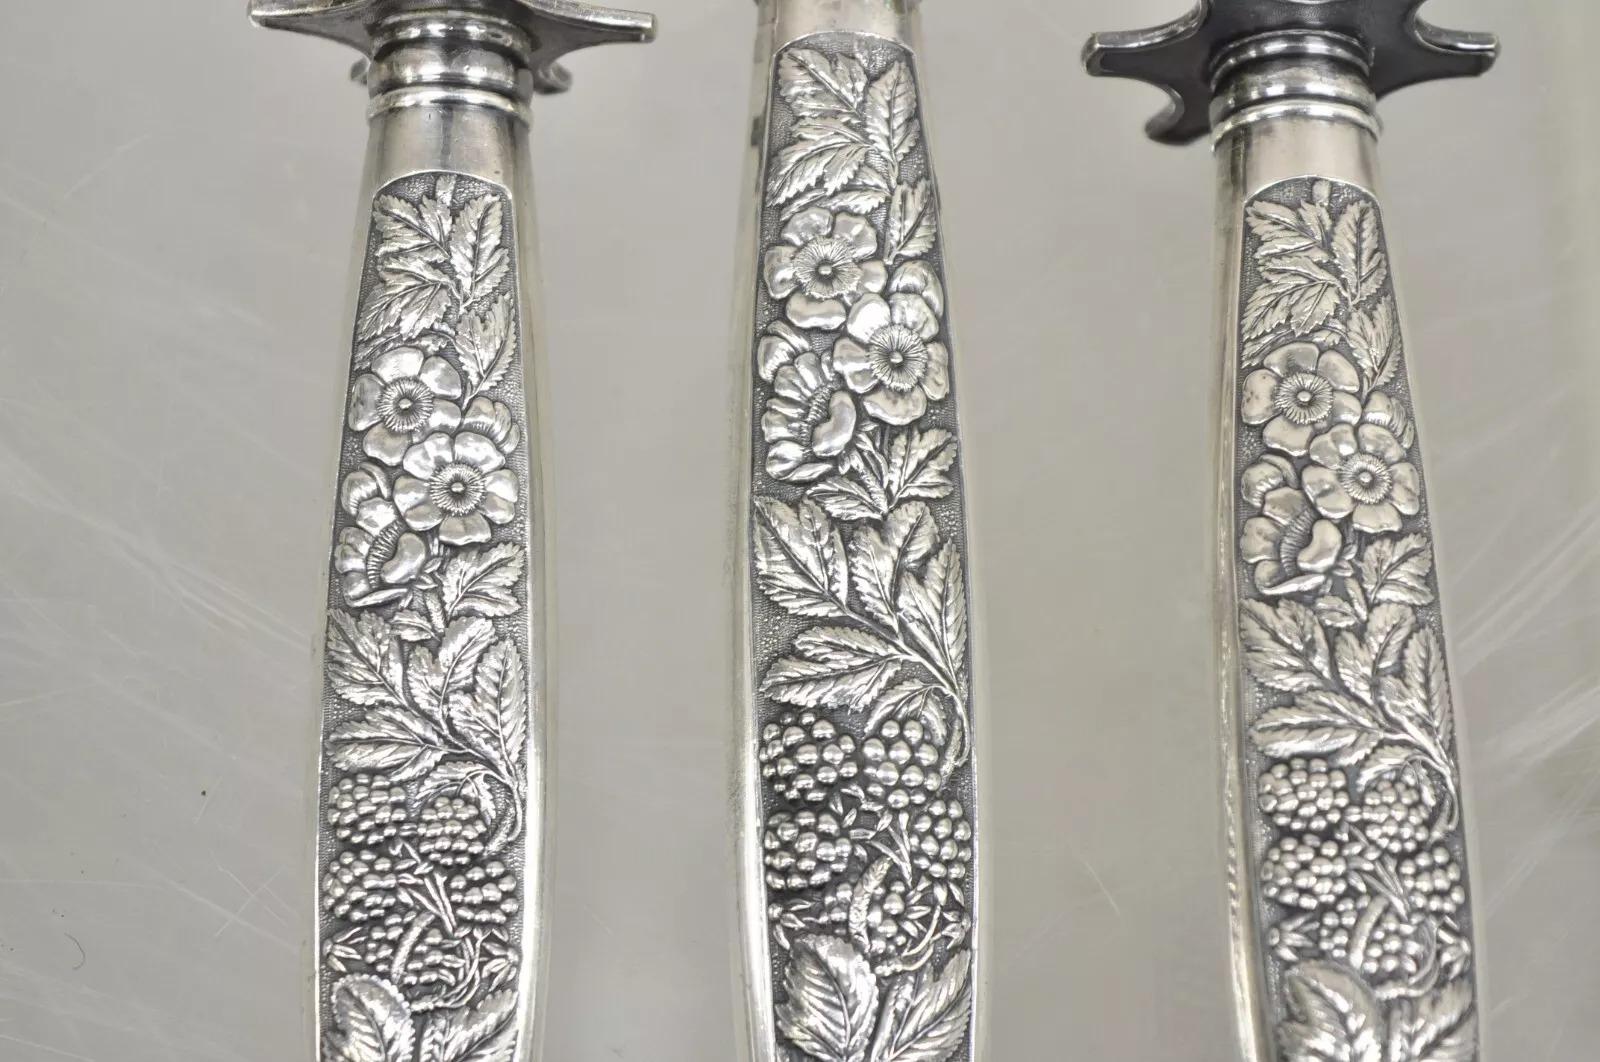 Antique R Wallace & Sons Victorian Silver Plated Repousse Meat Carving Set - 3Pc For Sale 2